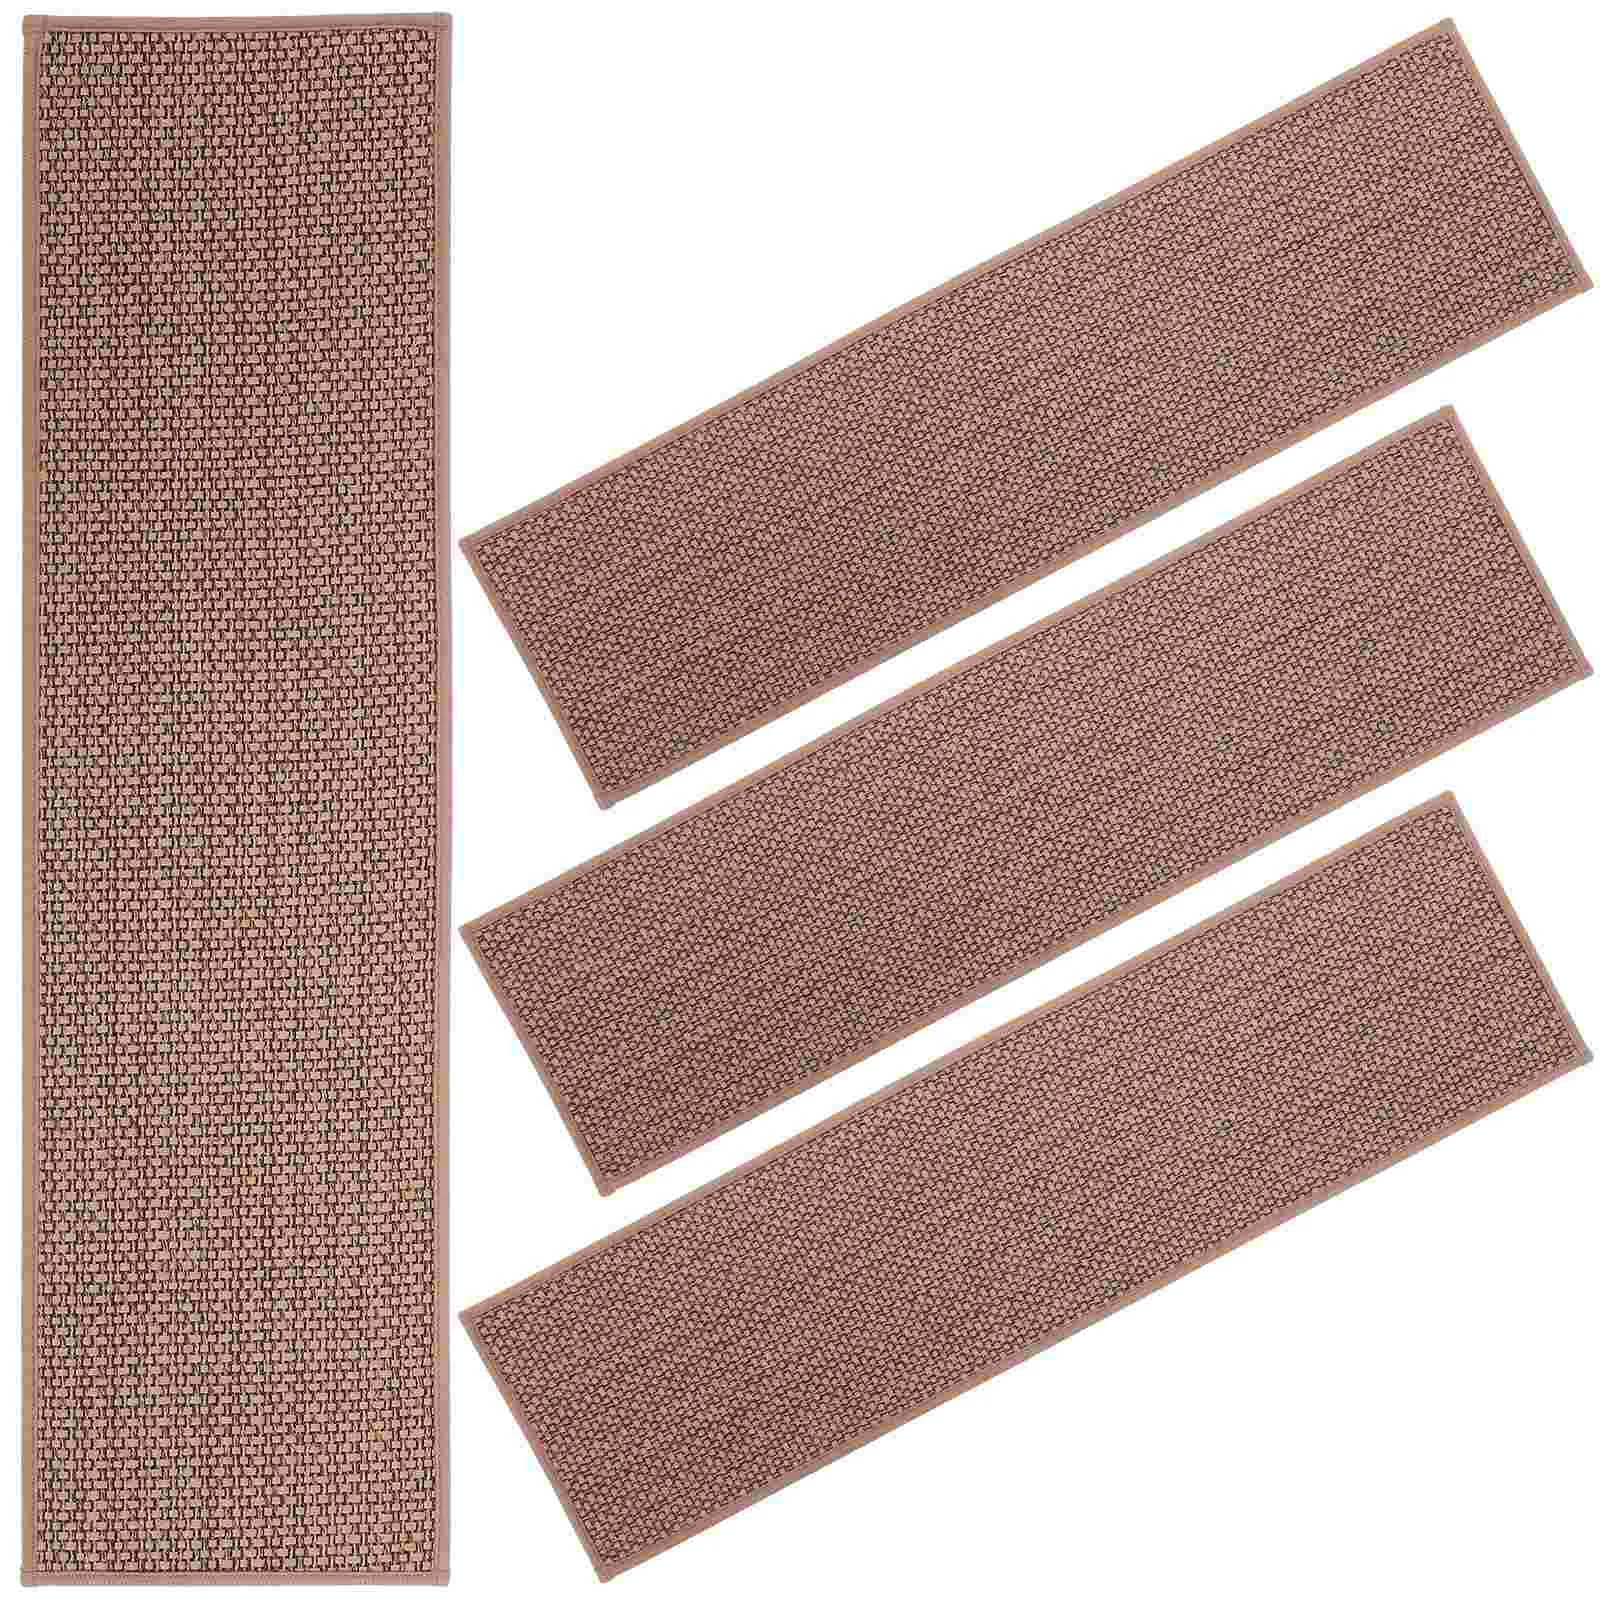 

4 Pcs Pedalboard Stair Carpet Treads Staircase Runner Slide Rail Carpeted Stairs Wooden Steps Indoor Tpr Nonslip